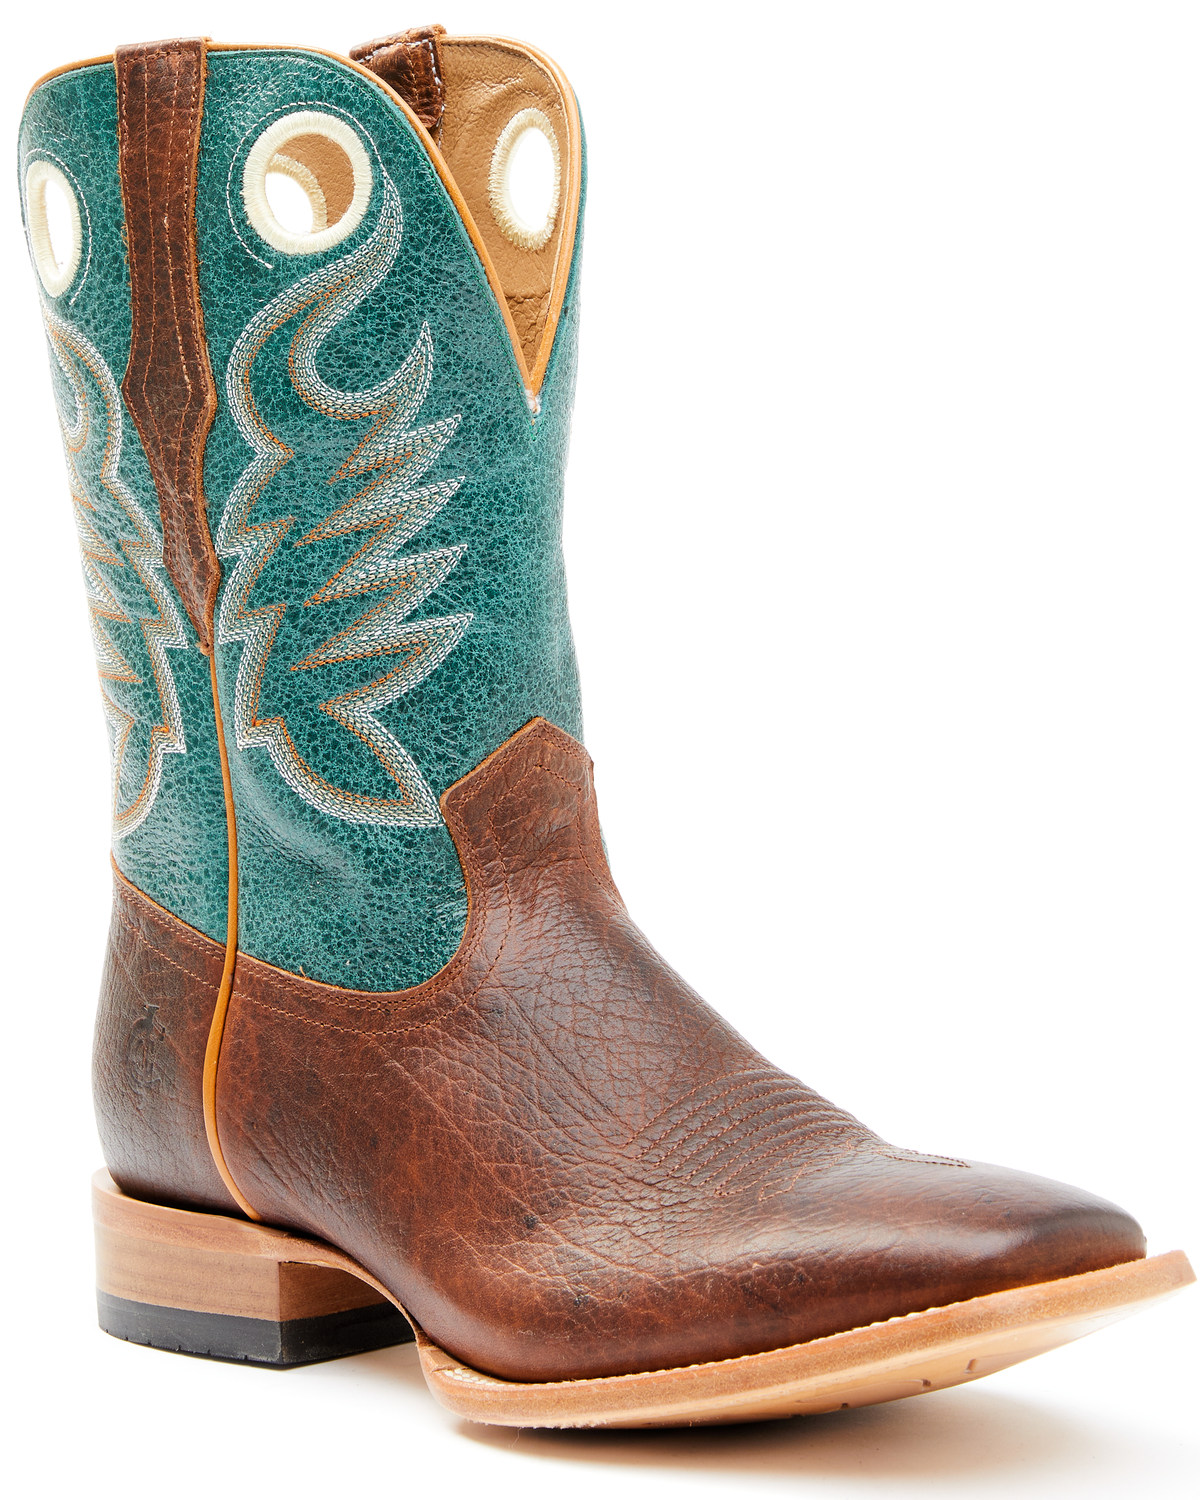 Cody James Men's Union Ocean Western Boots - Broad Square Toe